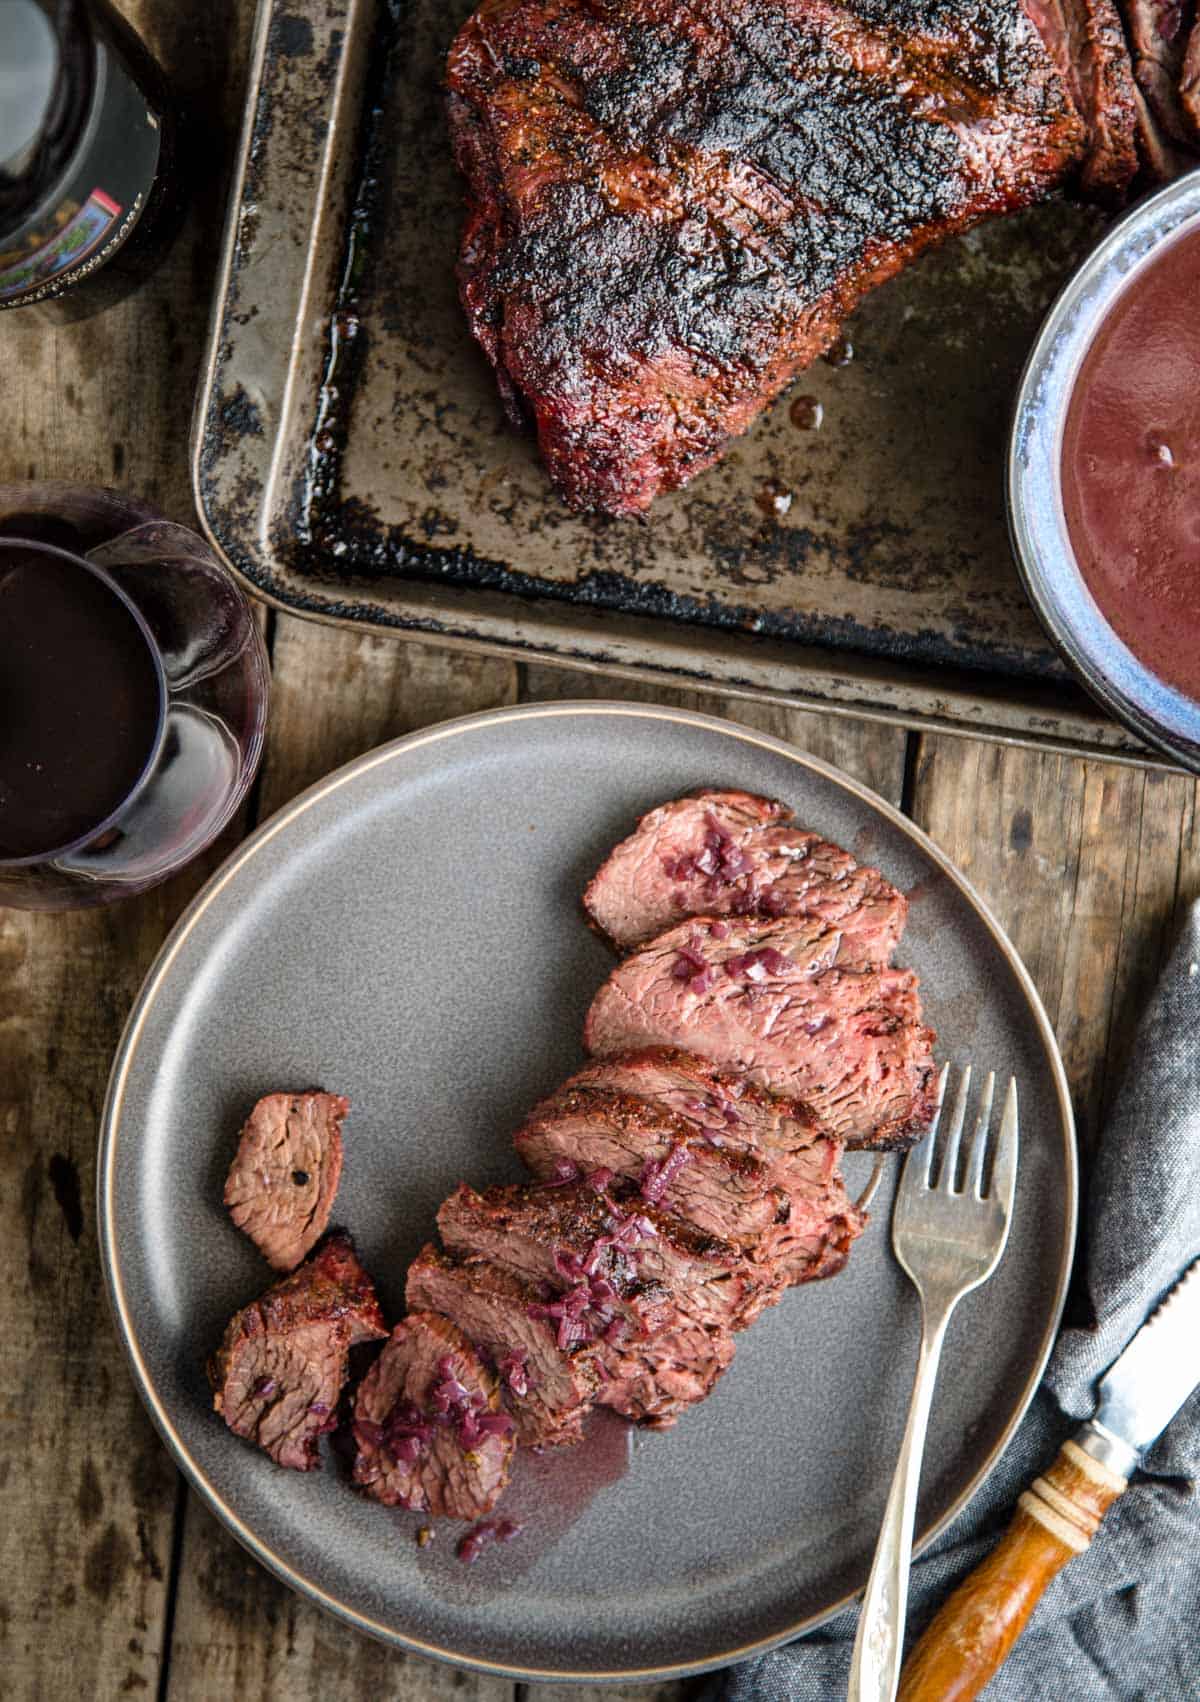 Slices of grilled Tri Tip on a plate served with a glass of Zinfandel red wine